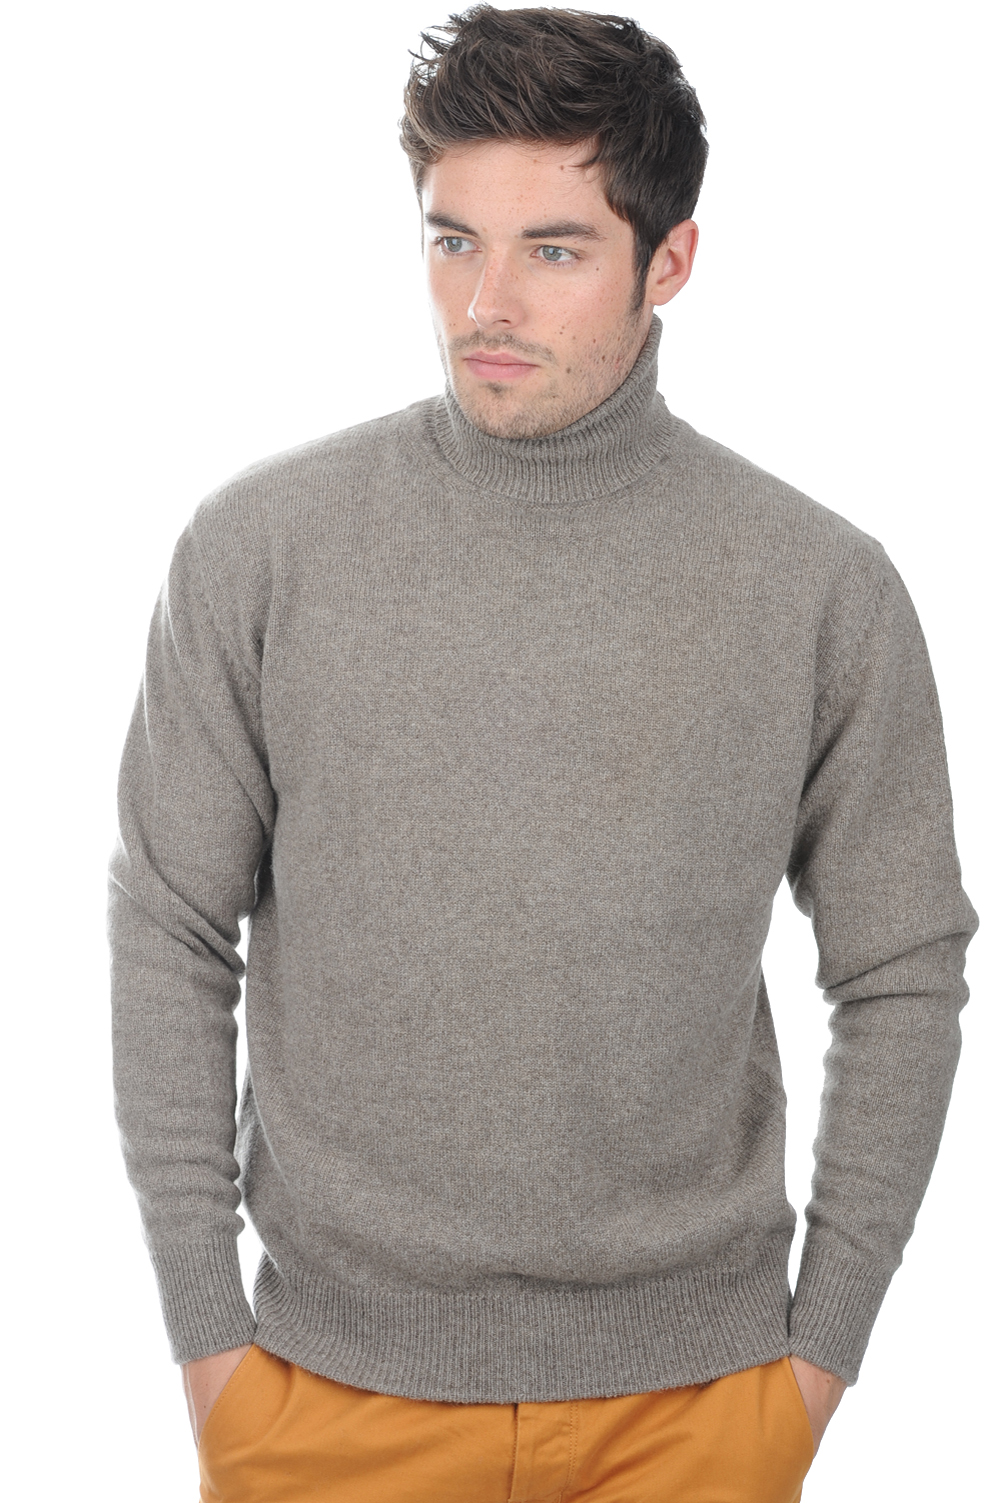 Yak pull homme col roule yakedgar marmotte naturel 2xl